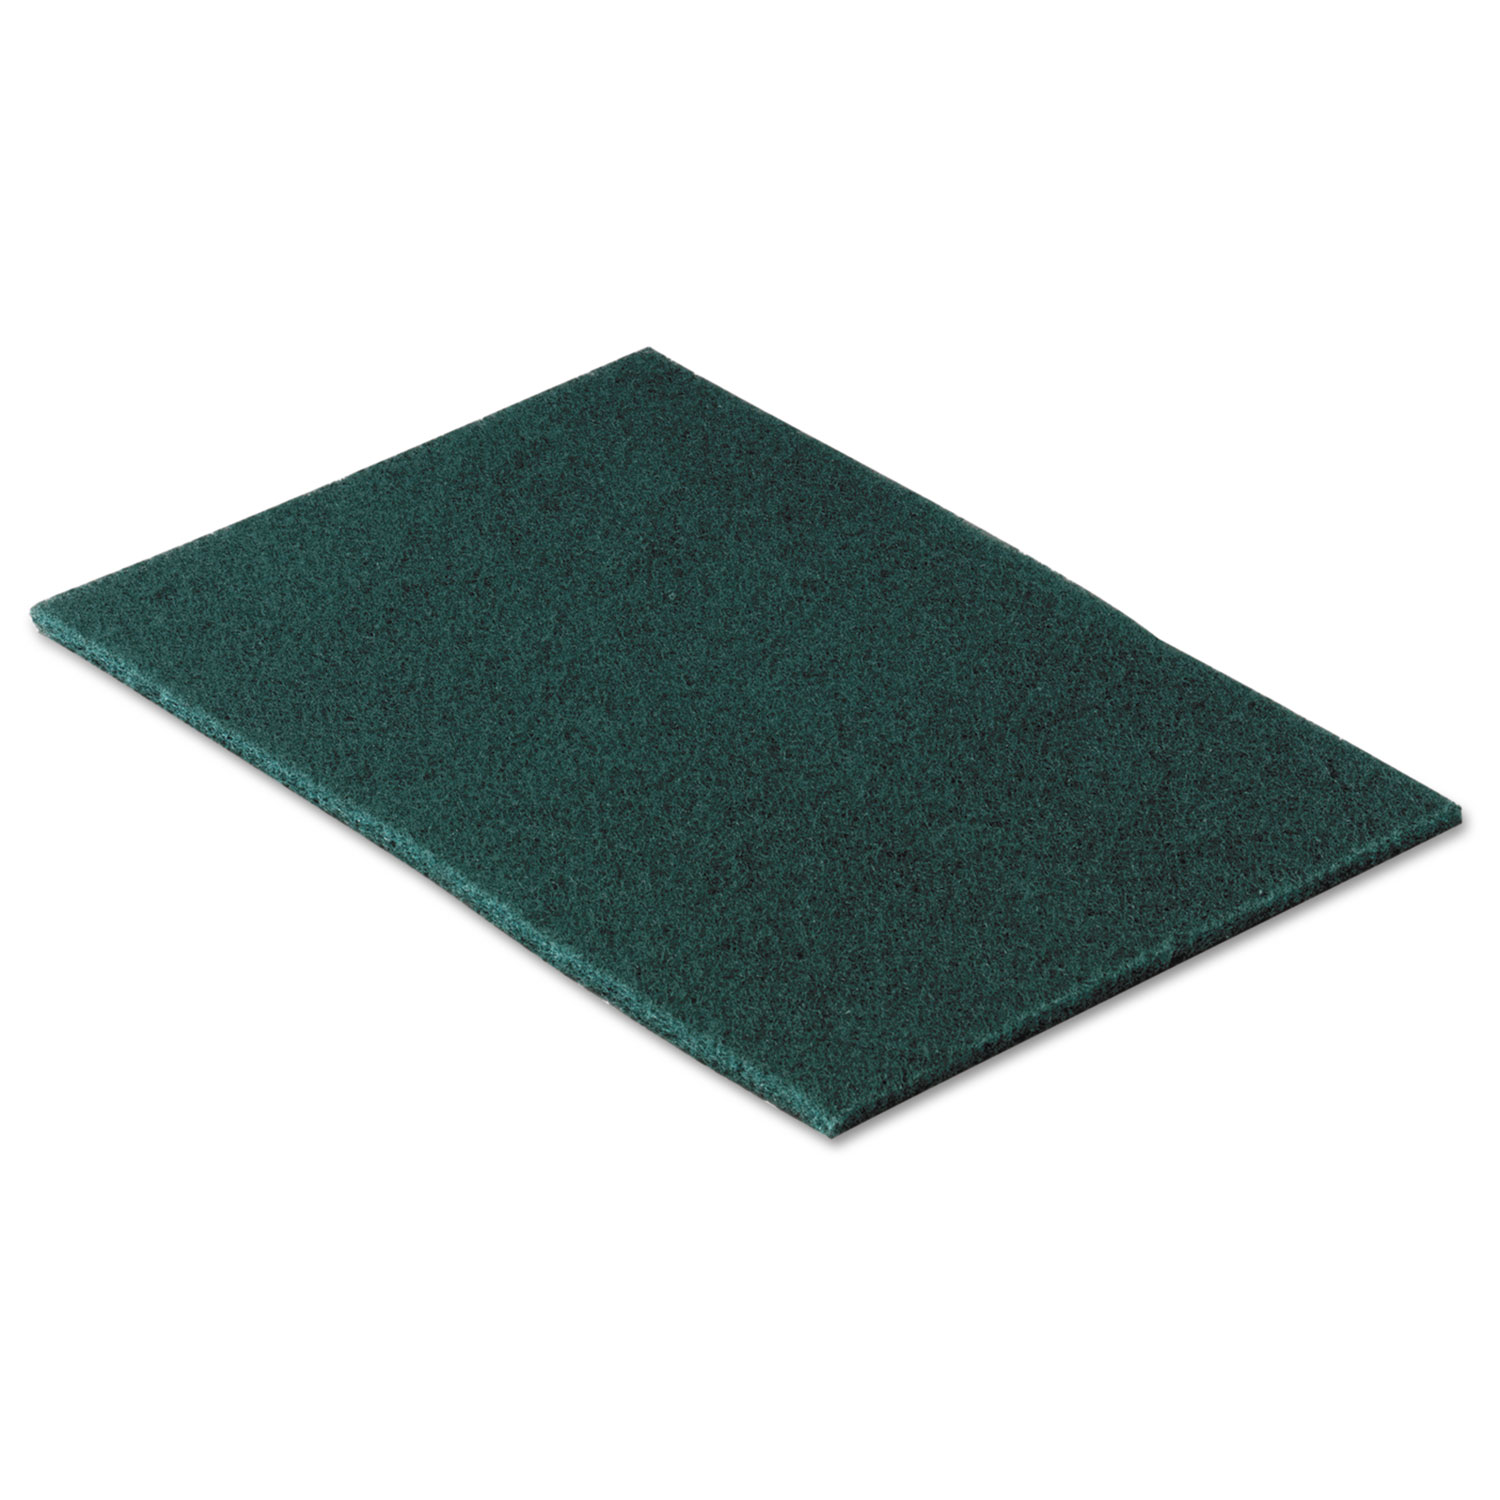  Scotch-Brite PROFESSIONAL 96CC Commercial Scouring Pad, 6 x 9, 10/Pack (MMM96CC) 